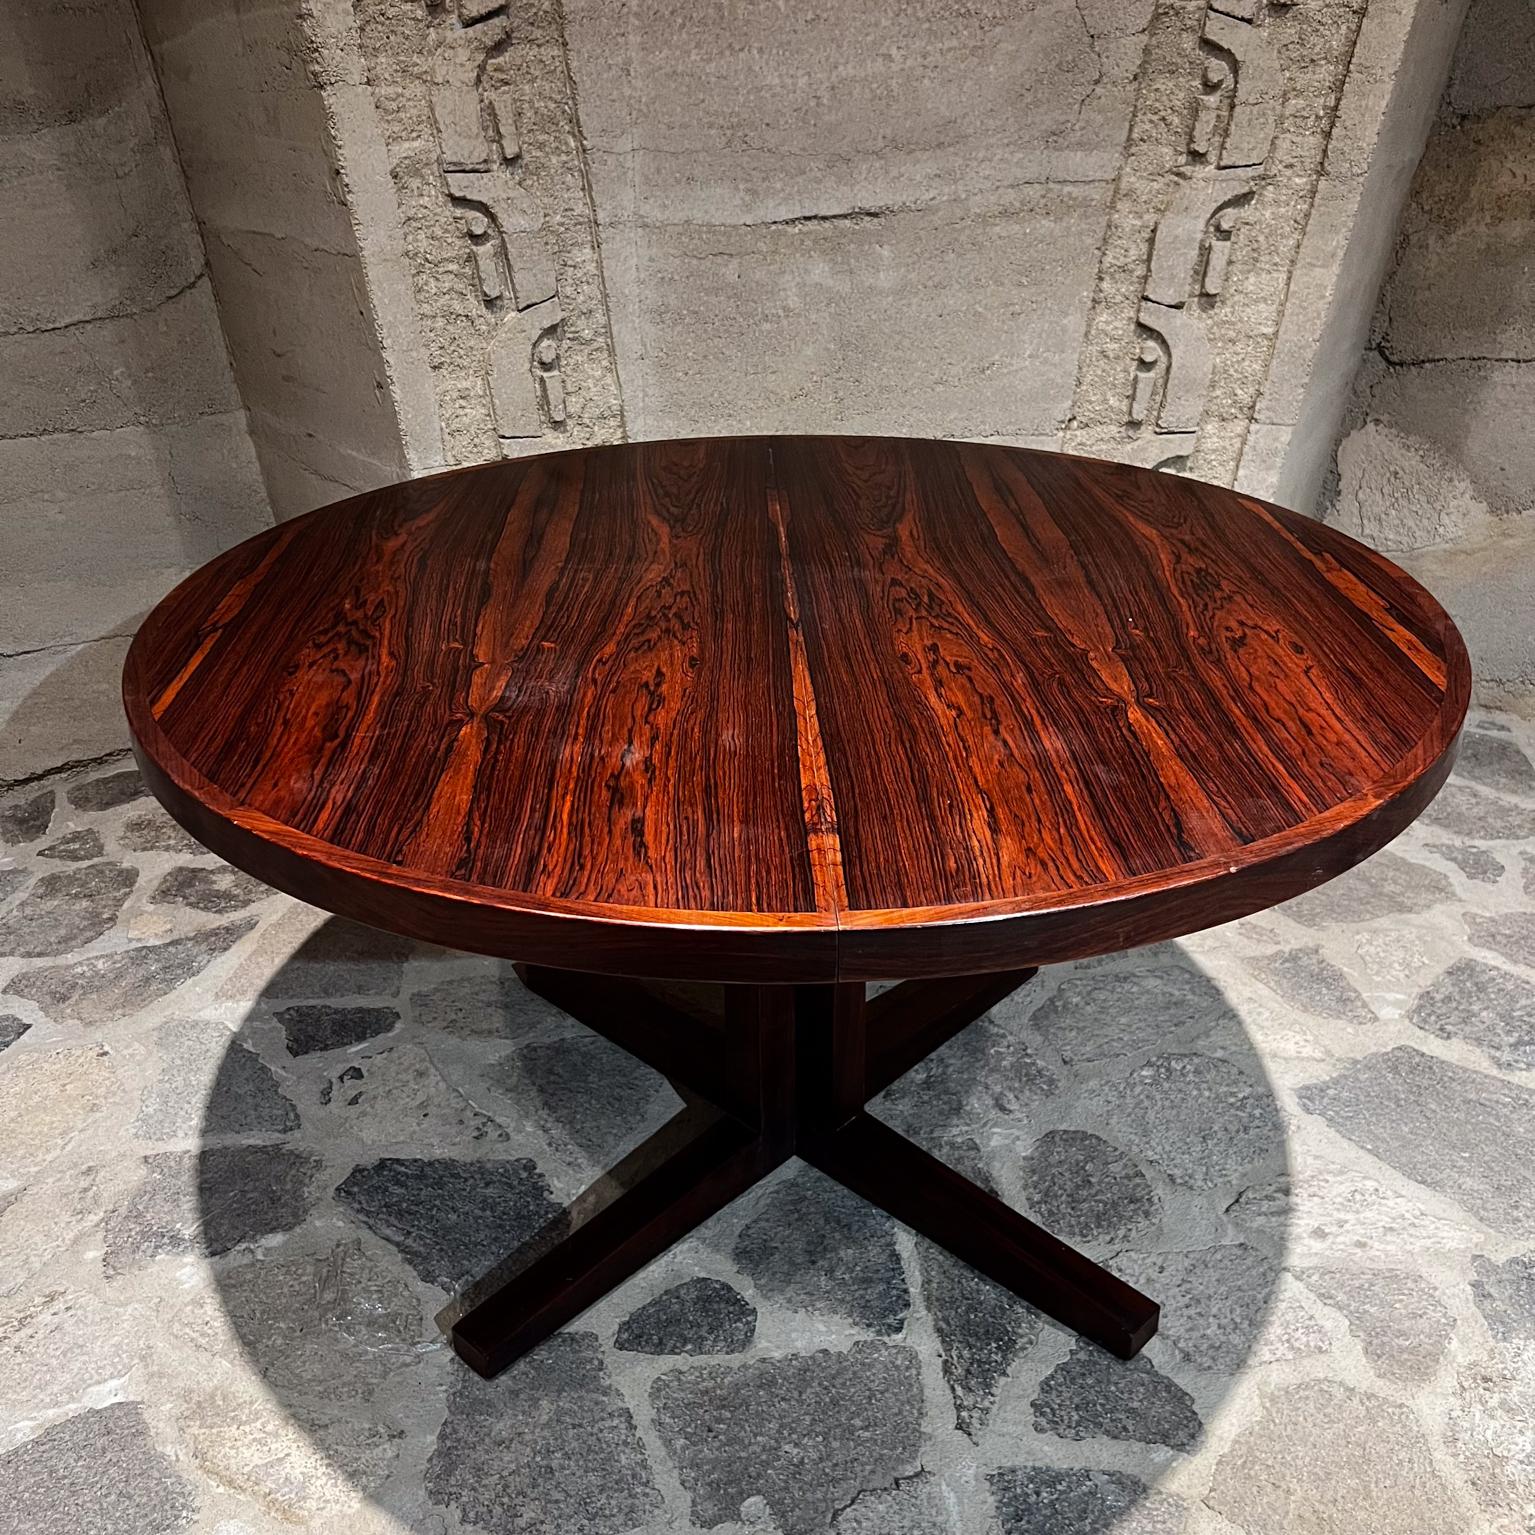 Danish Modern 1970s Scandinavian Rosewood Dining Table.
Attribution Dyrlund, unsigned.
Round to large oval extended.
Solid wood legs. Round top in plywood with book matched rosewood veneer.
Clean modern design. Table has two extensions.
51 diameter